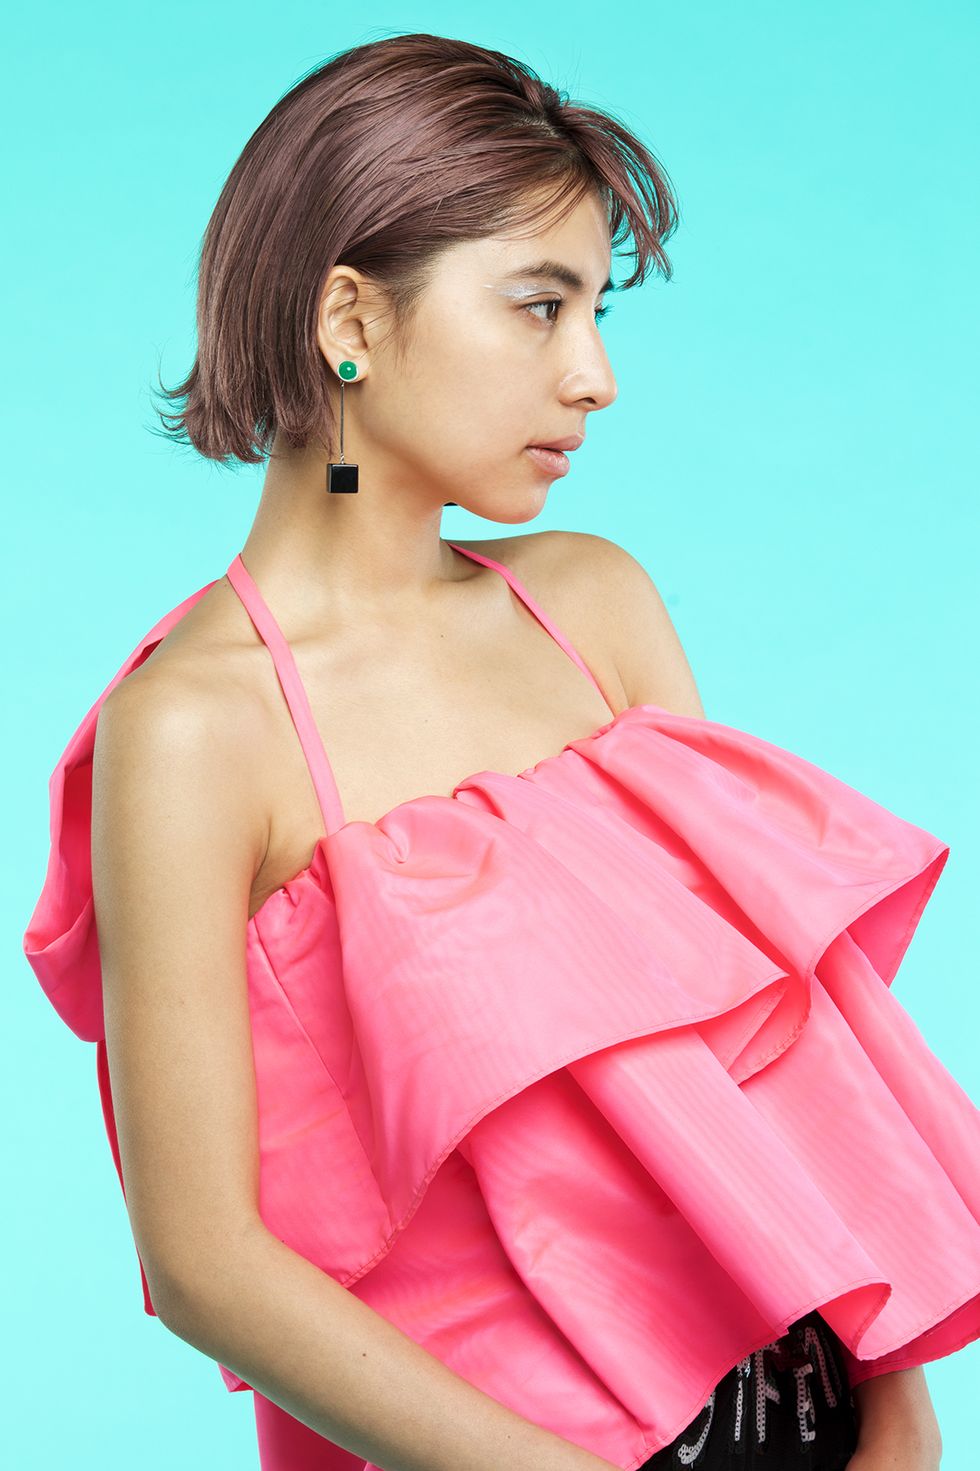 Hair, Clothing, Shoulder, Pink, Beauty, Skin, Hairstyle, Fashion model, Model, Joint, 